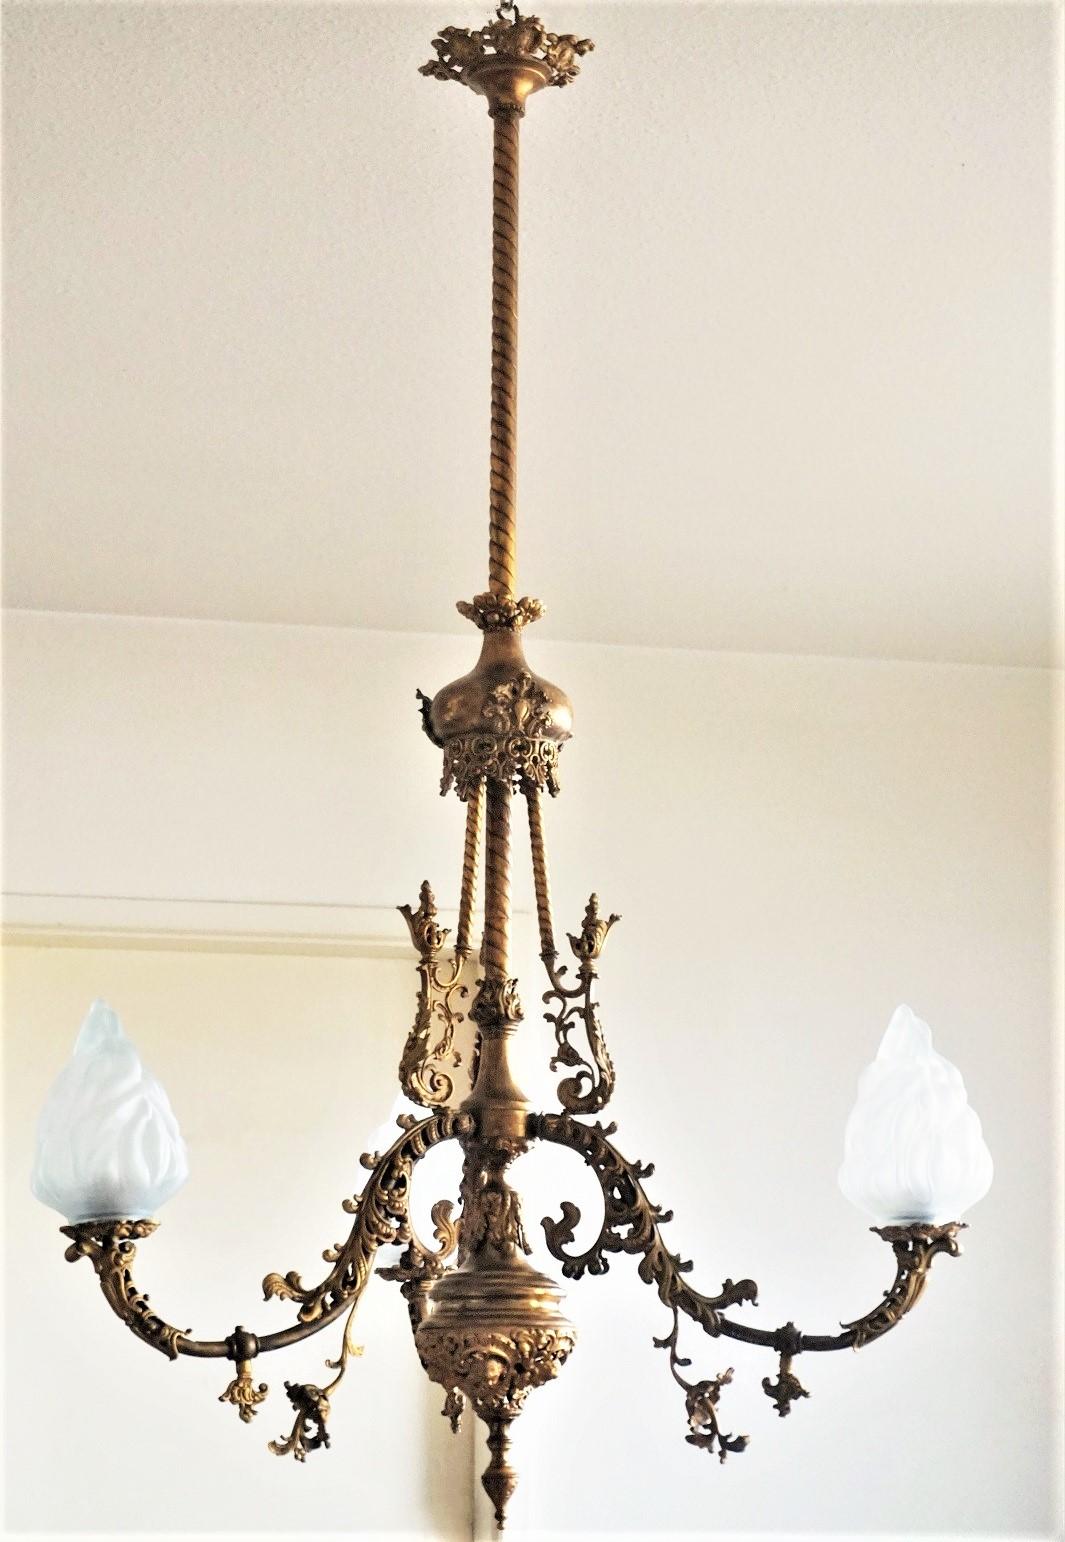 A very fine, large fire-gilded bronze church chandelier in Louis XVI style, France, late 18th century. This wonderful piece is finely elaborate in precise detail decorated with elegant foliate, flowers and cherub faces, three curved arms with